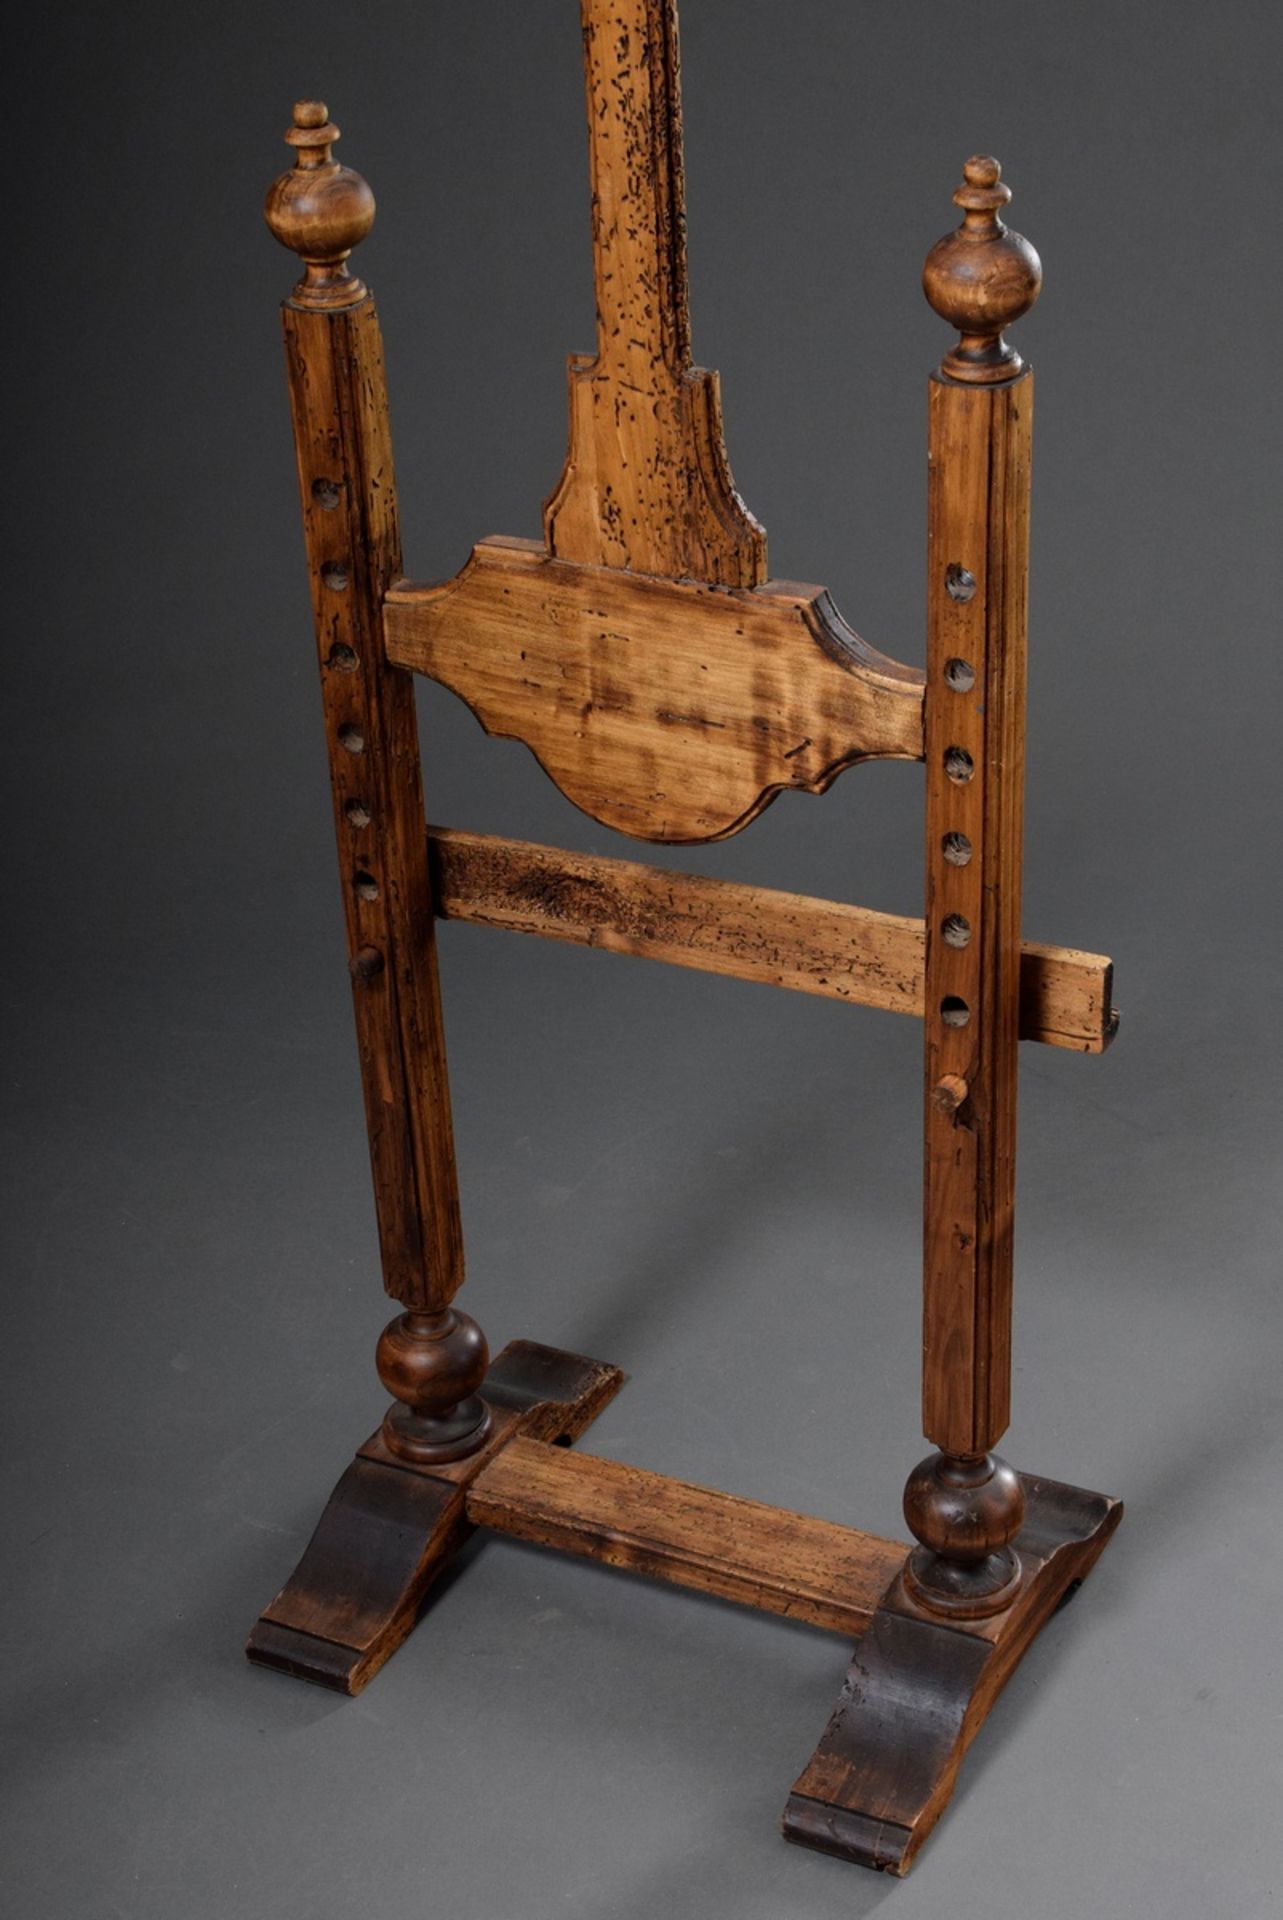 Rustic height-adjustable easel with turned balusters, softwood, 19th c., h. 180cm, old worm damage, - Image 5 of 5